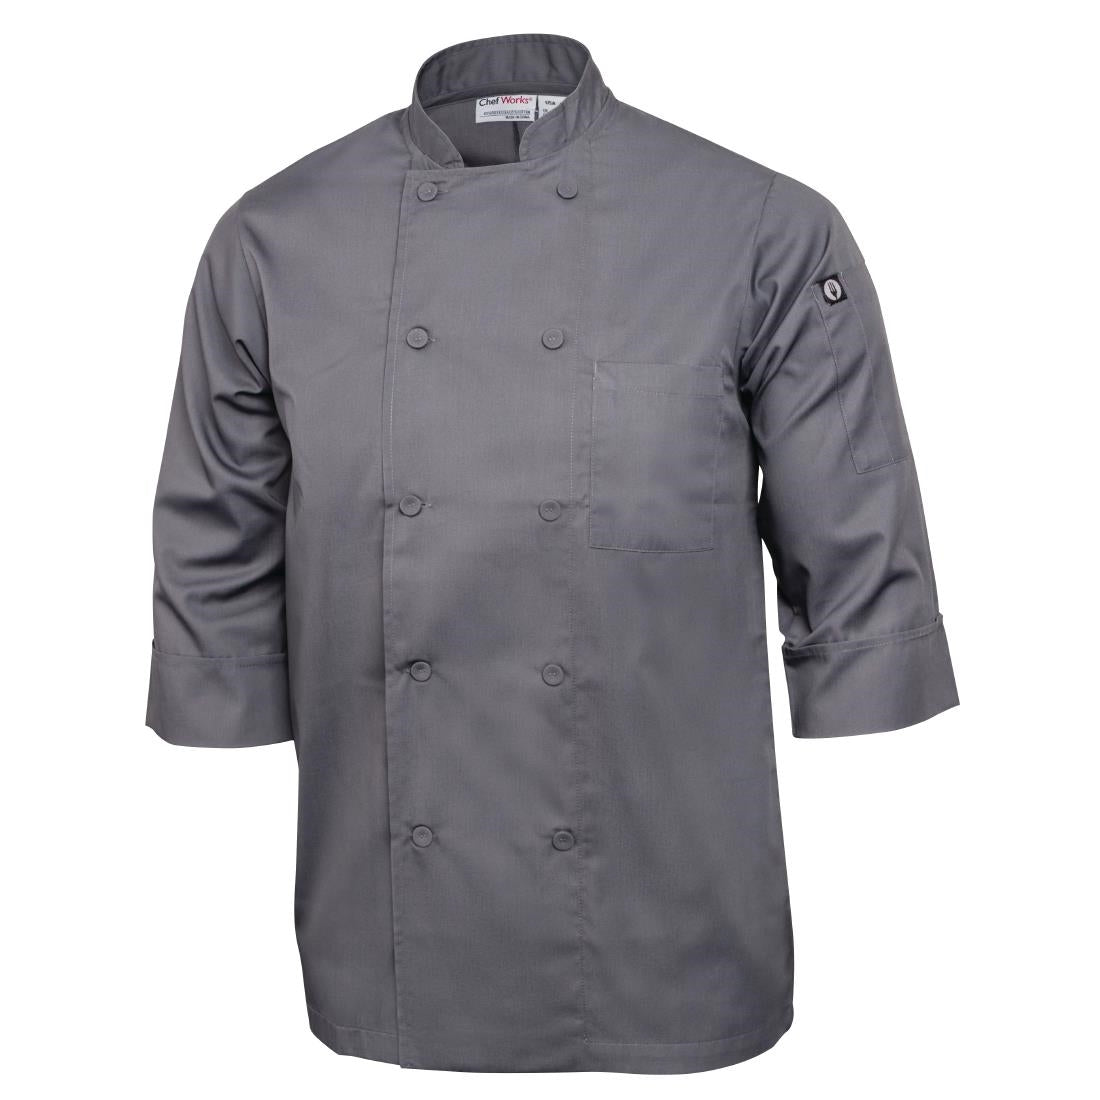 A934-XS Chef Works Unisex Chefs Jacket Grey XS JD Catering Equipment Solutions Ltd